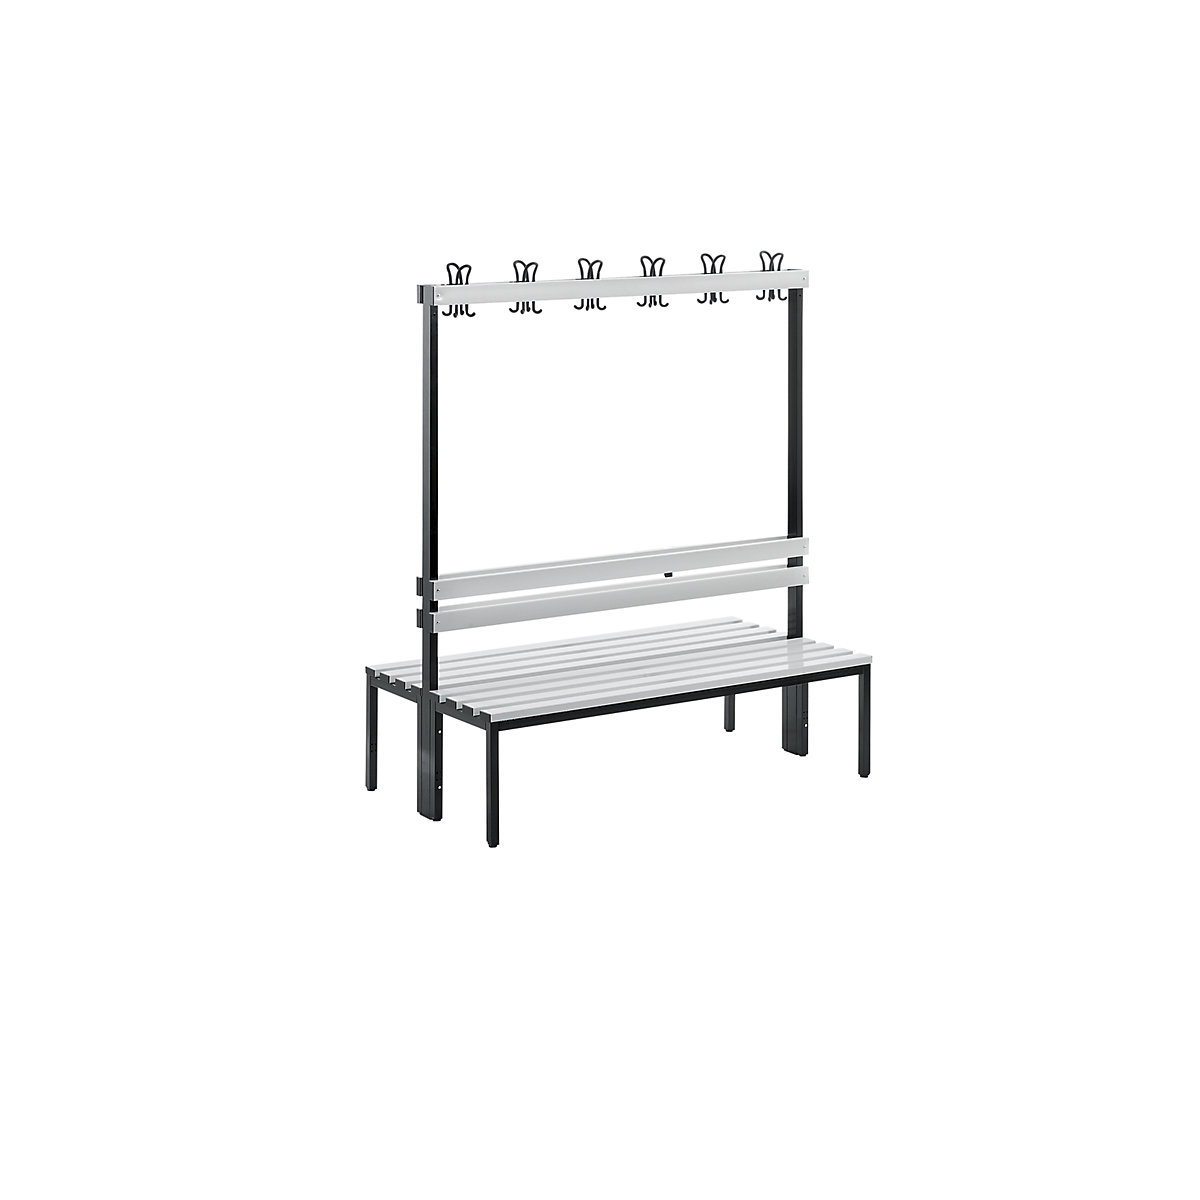 Wolf – Cloakroom bench, double sided